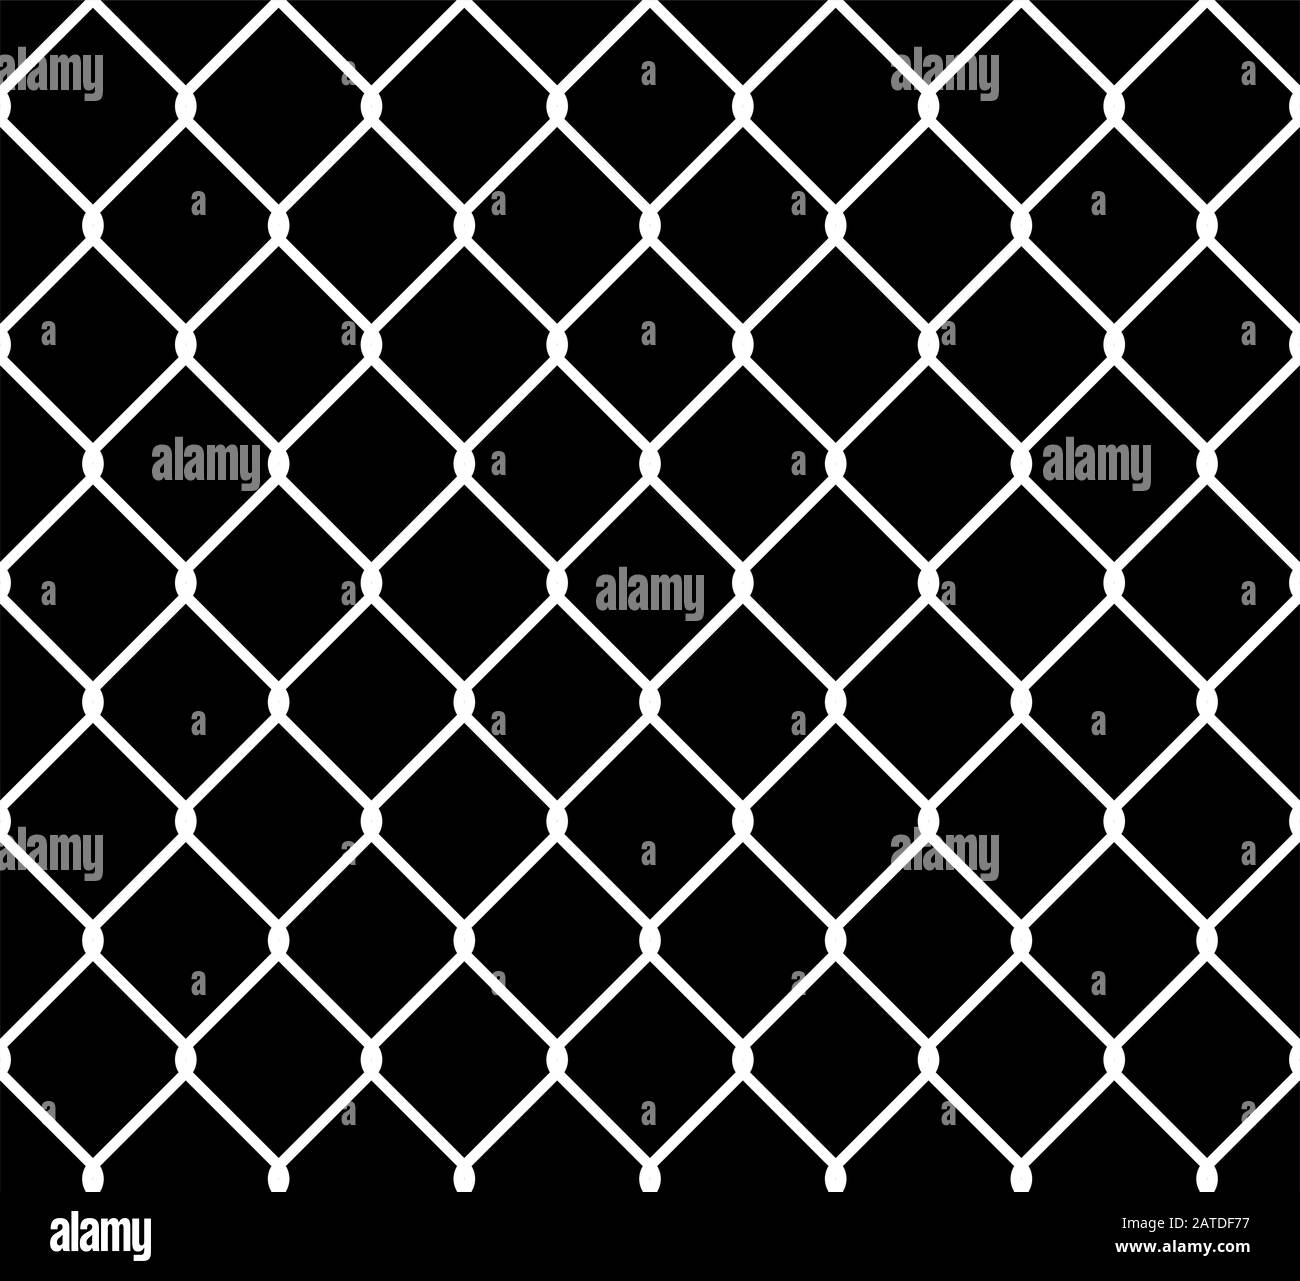 Wired steel fence seamless texture overlay. Metallic wire mesh